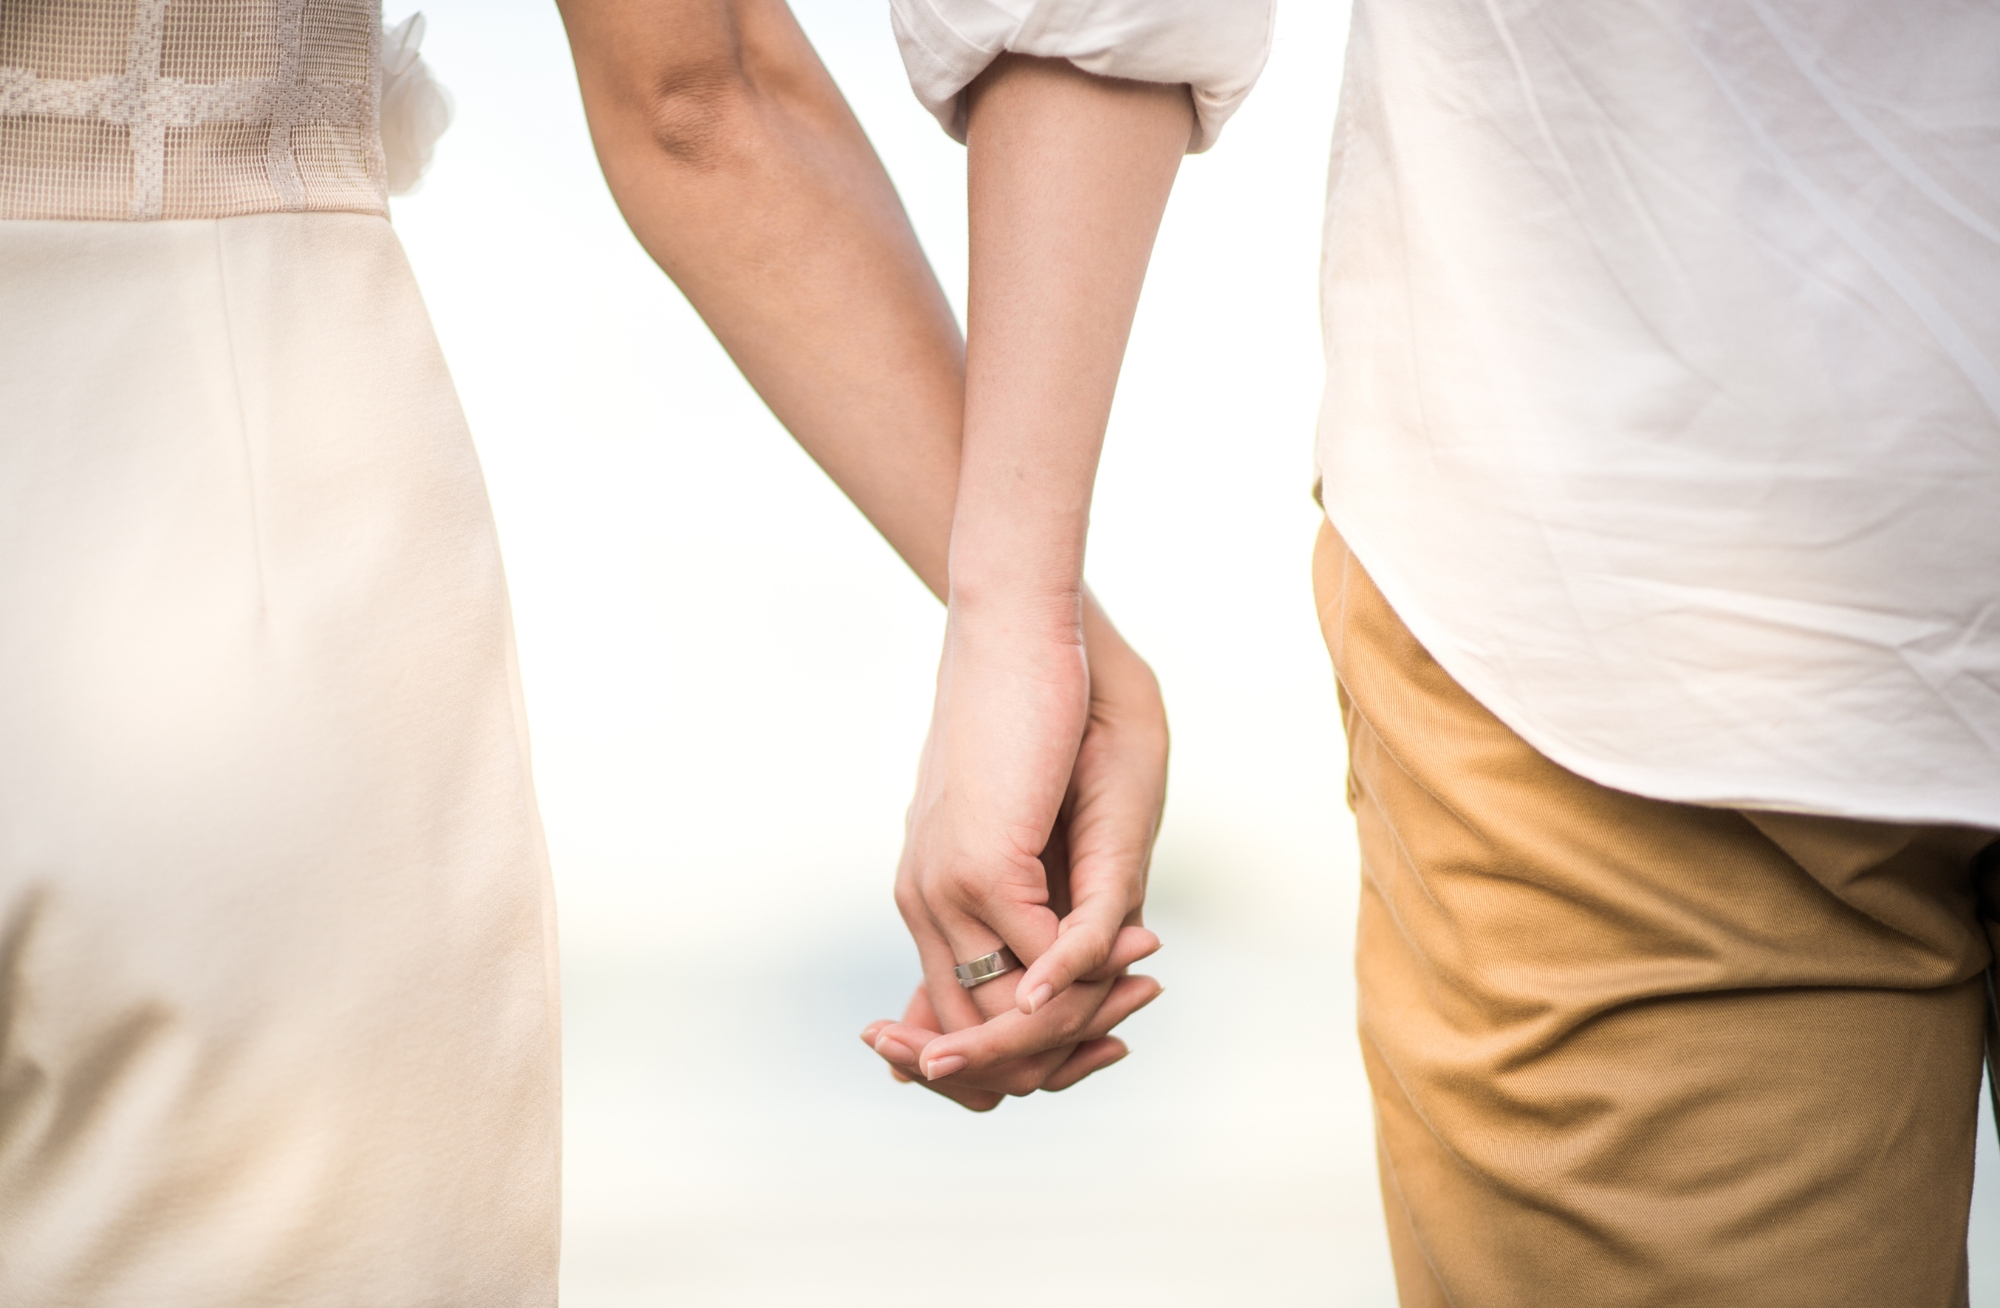 Man and woman holding hands. The woman is wearing a white dress while the man is wearing a white shirt and tan pants.